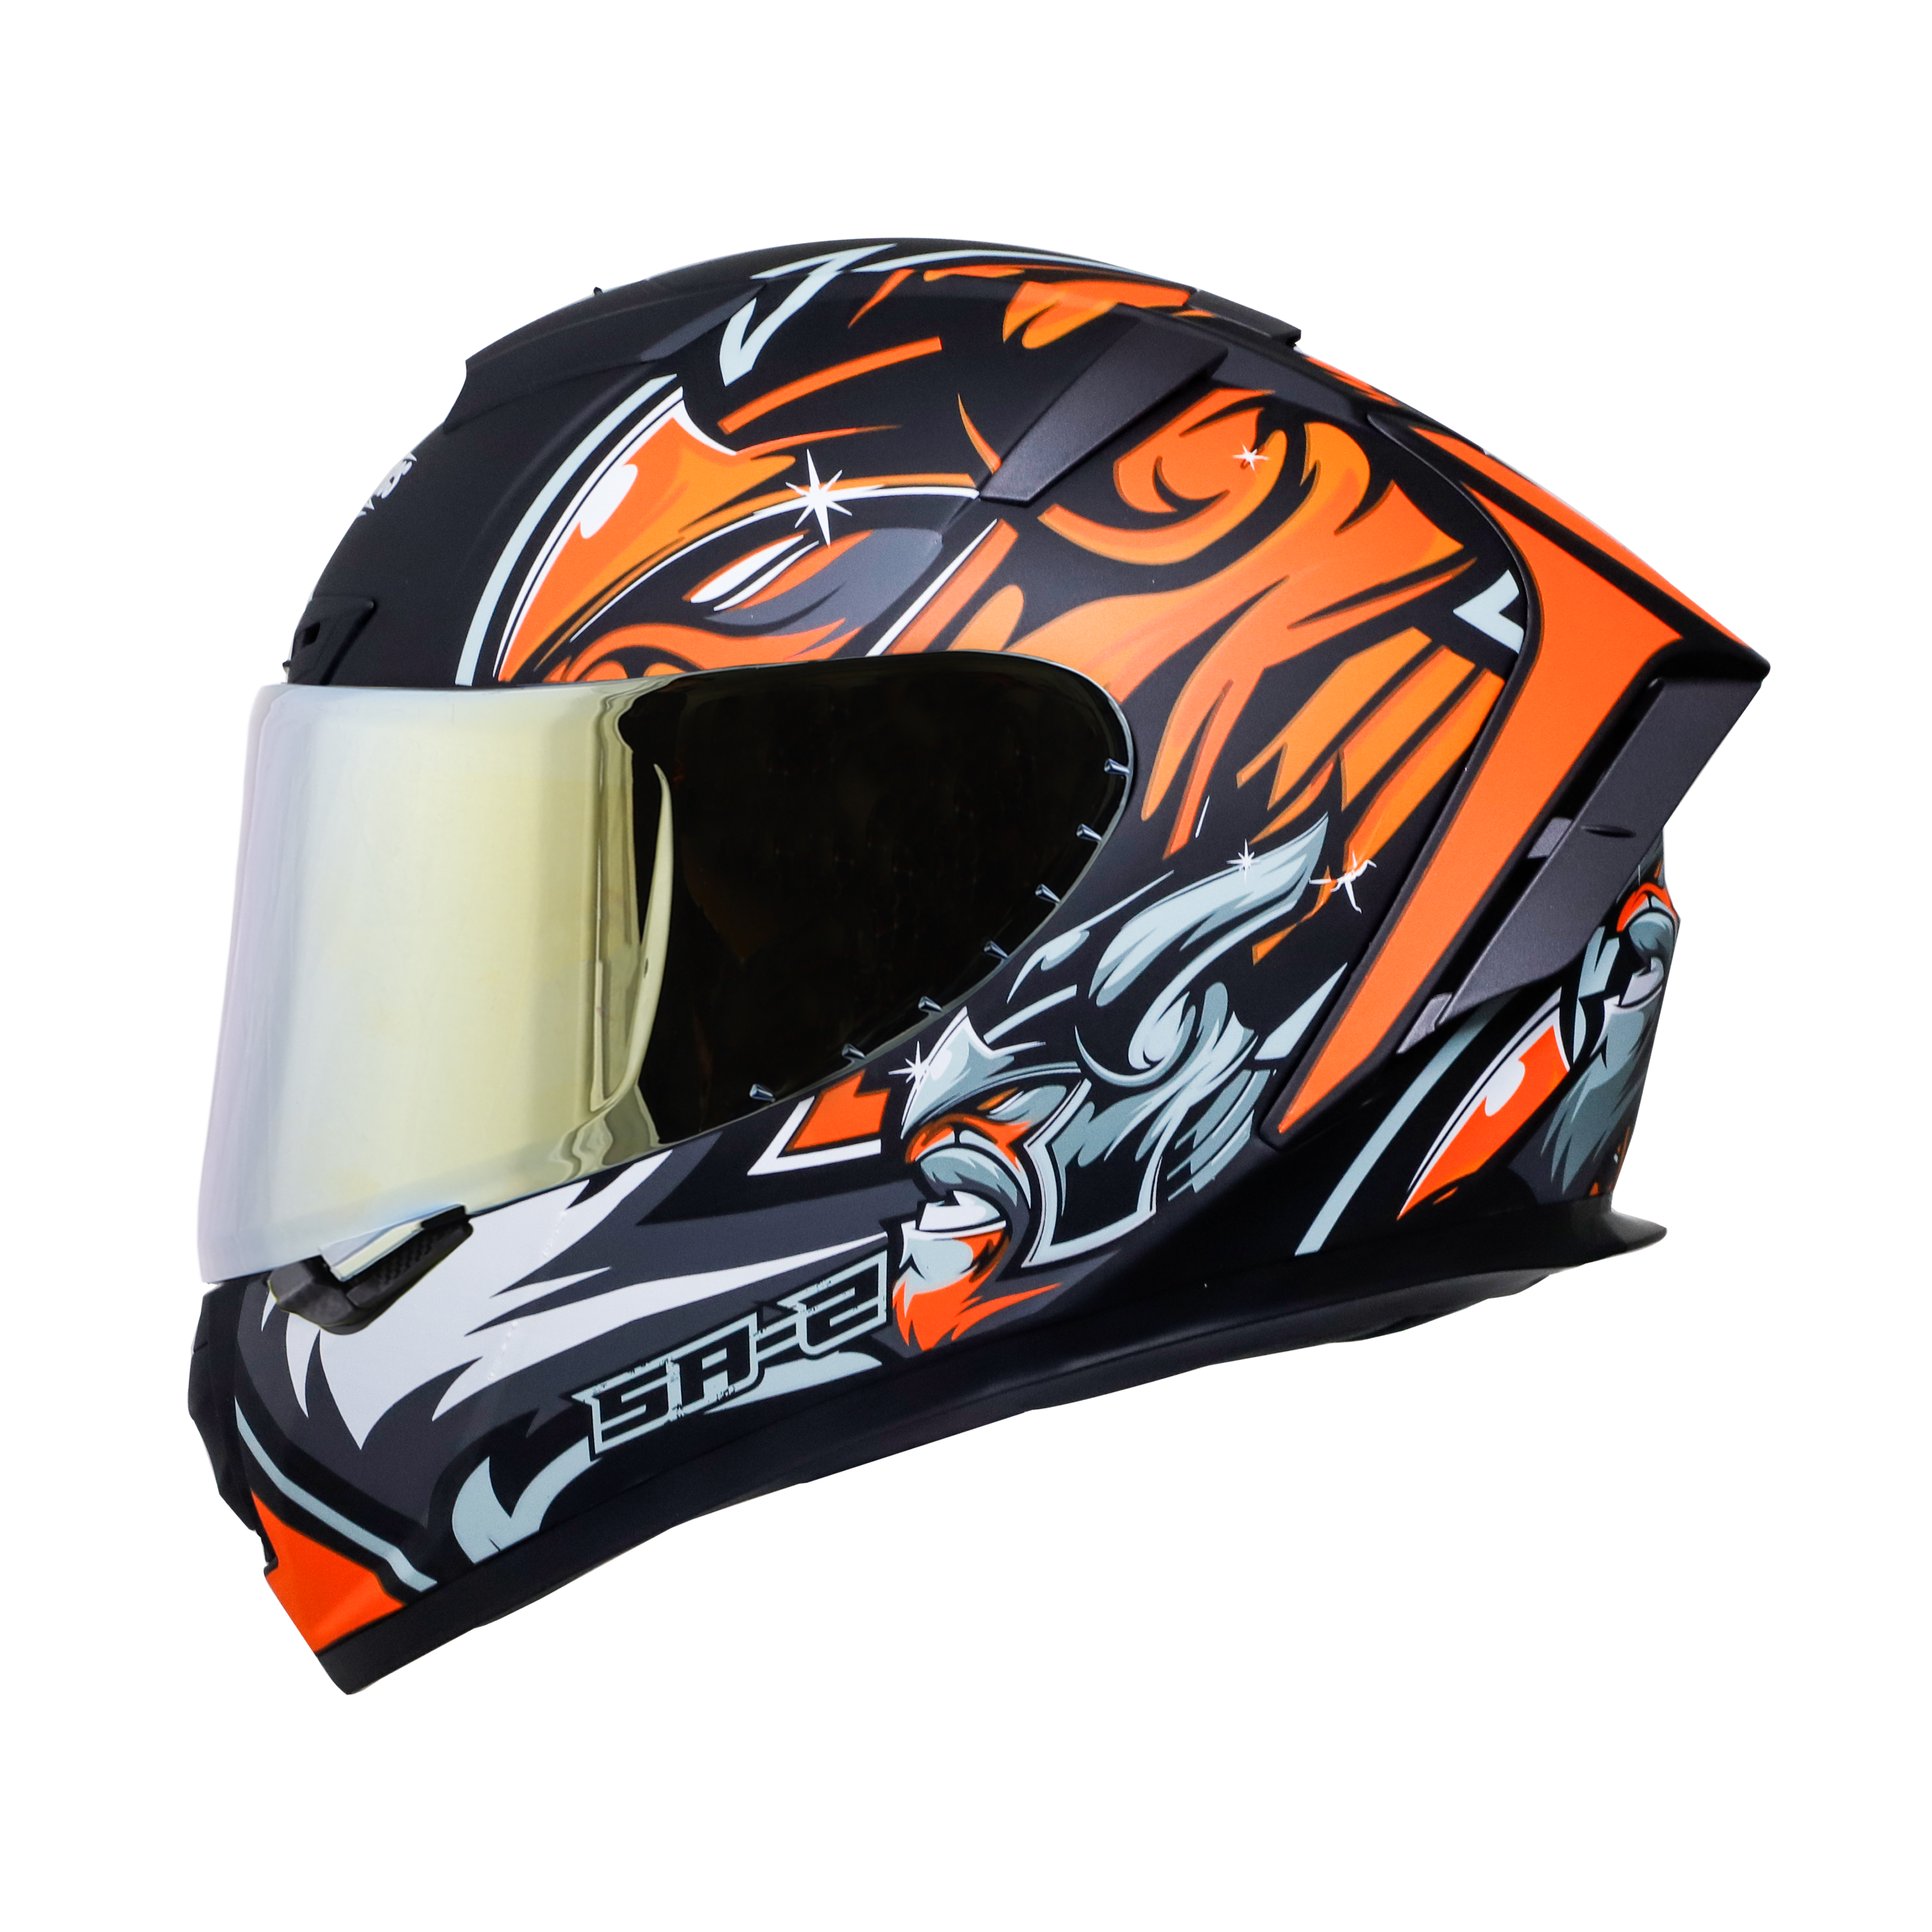 SA-2 VILLAIN GLOSSY BLACK WITH ORANGE (FITTED WITH CLEAR VISOR EXTRA CHROME GOLD VISOR FREE)